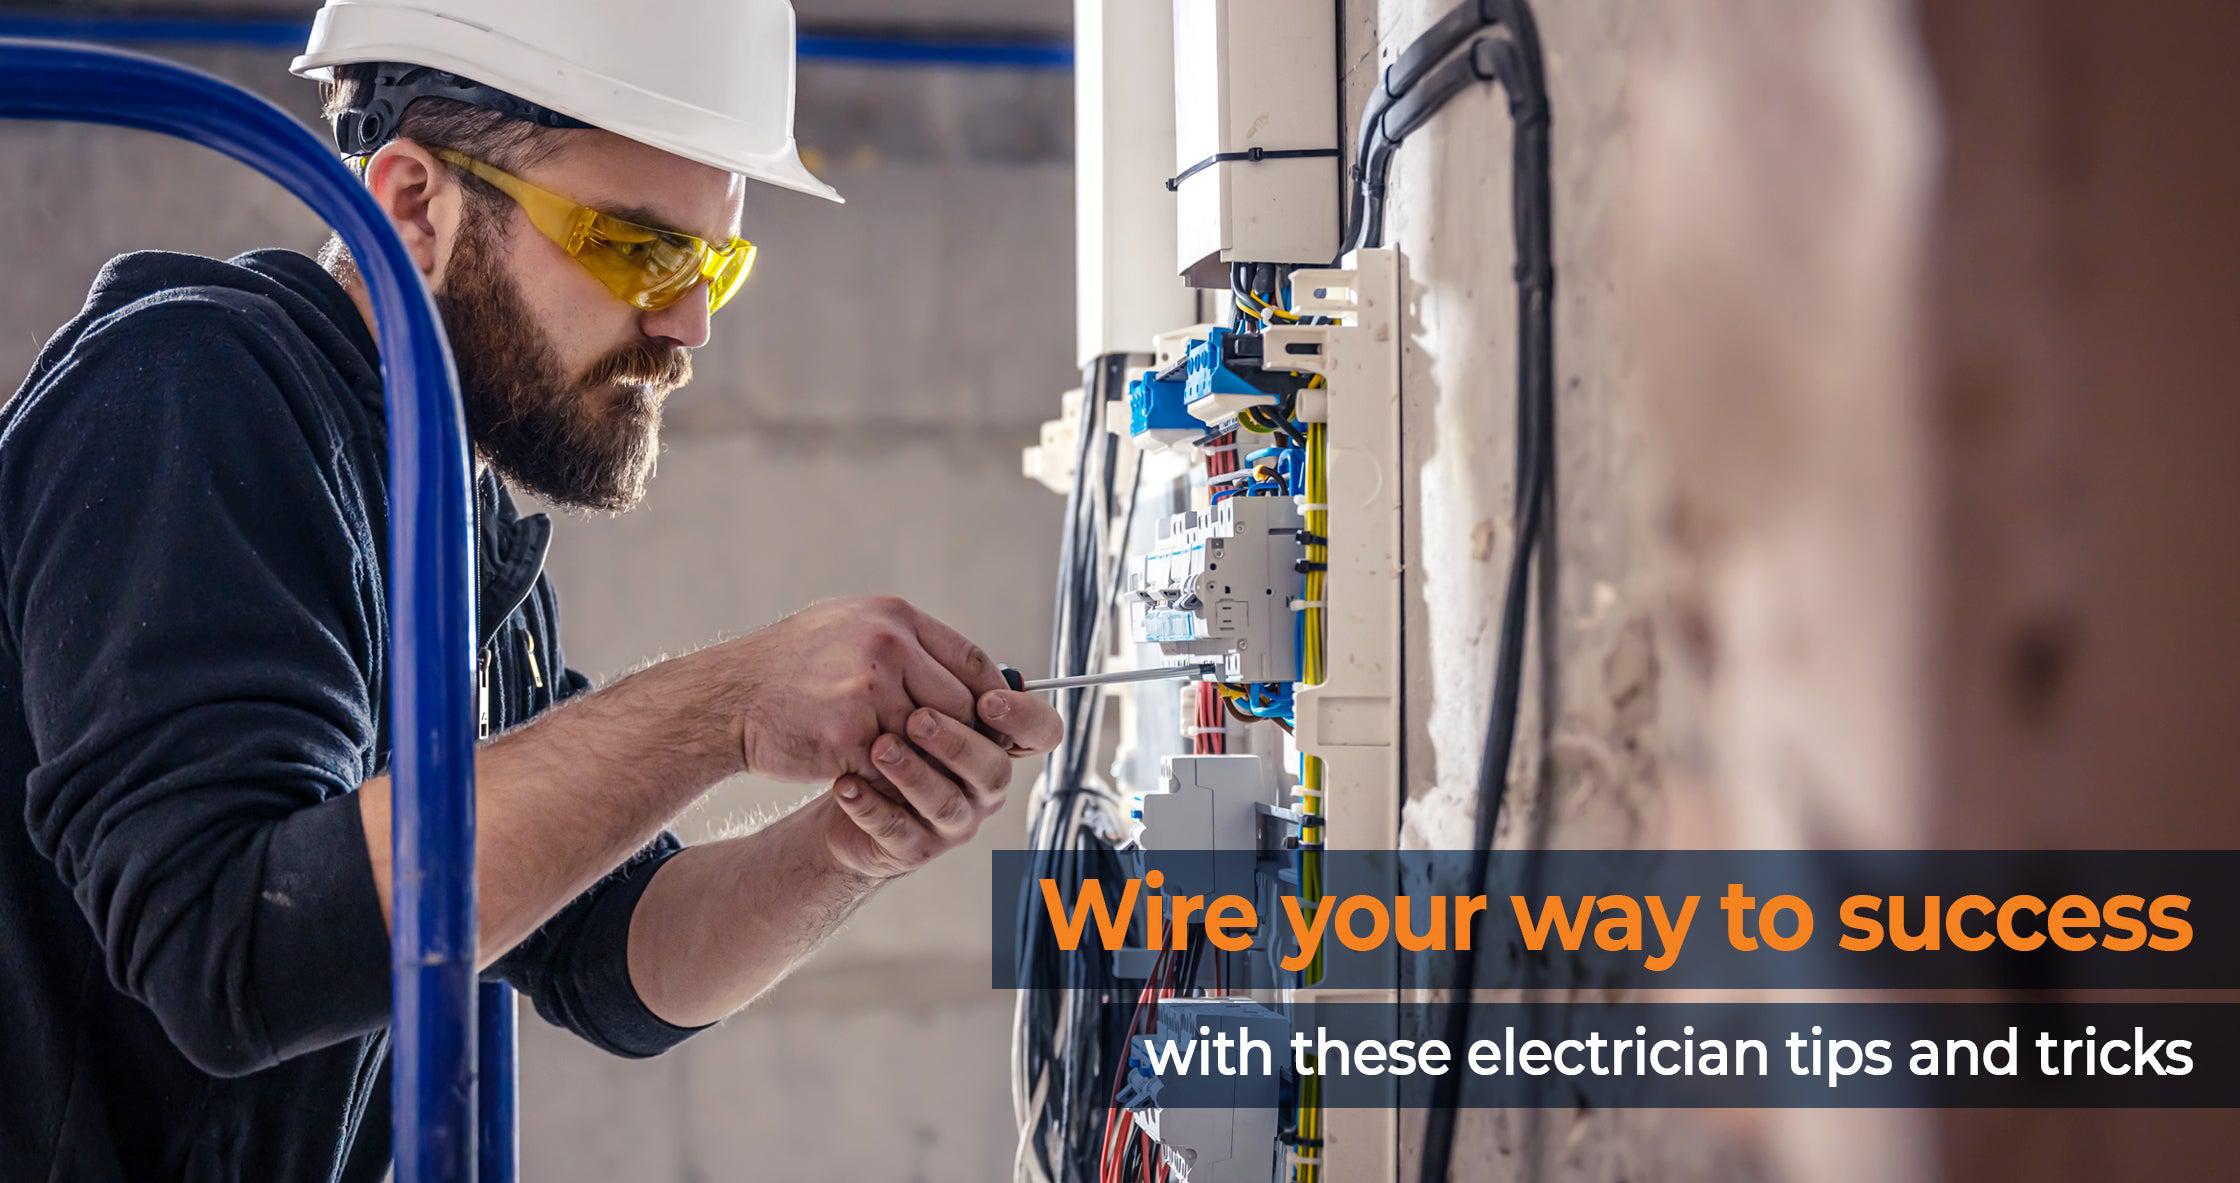 Wire your way to success - with these electrician tips and tricks.